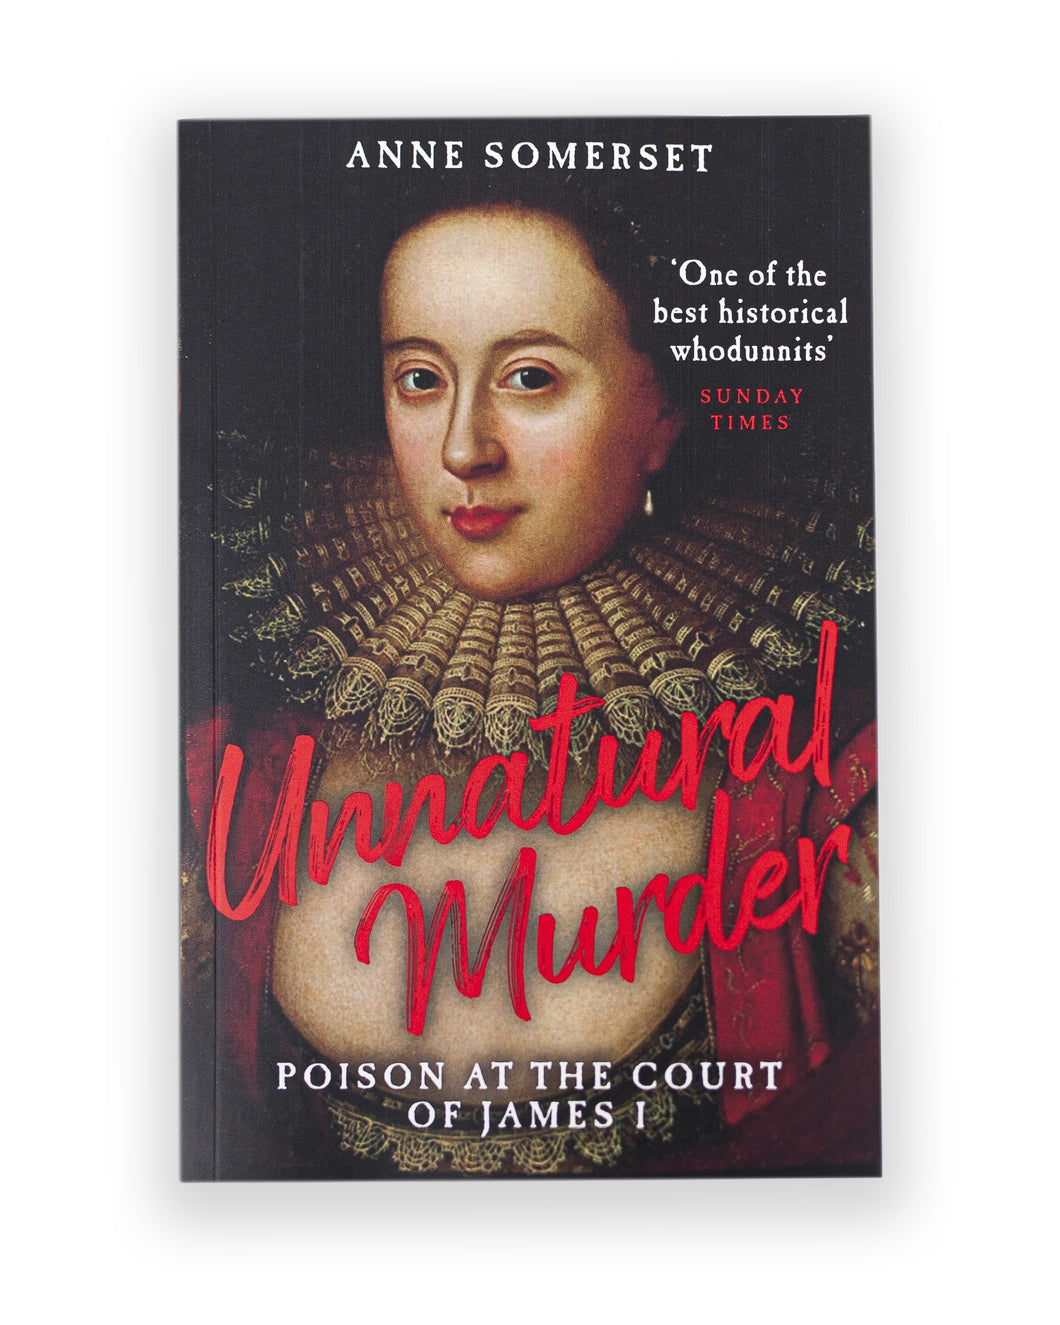 Unnatural Murder by Anne Sommerset Book. Front Cover